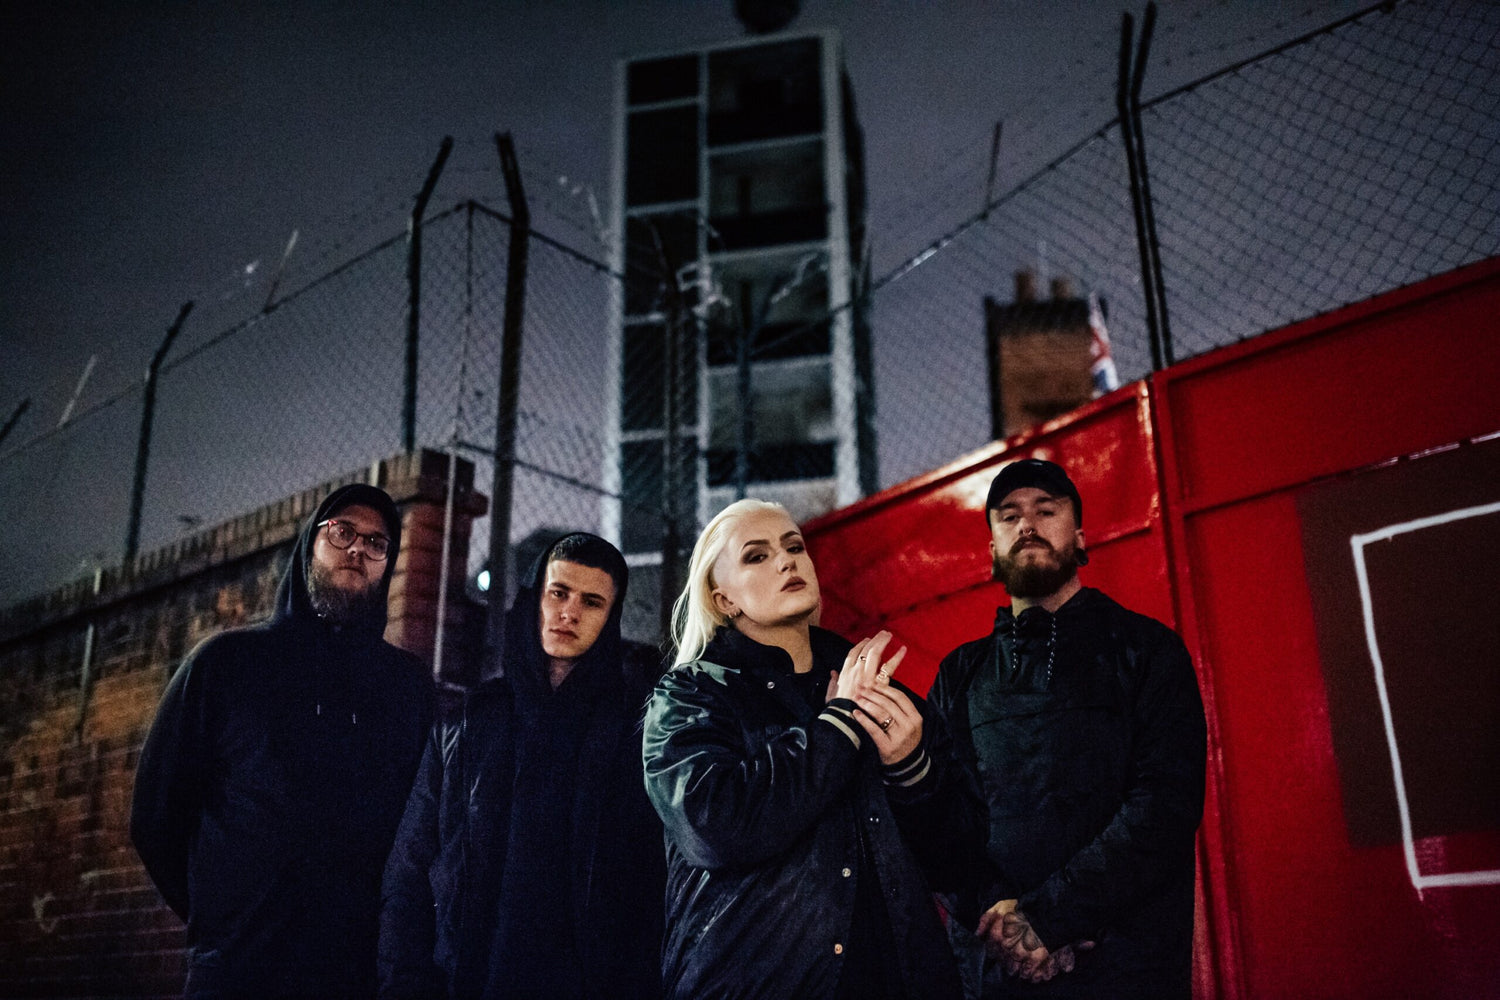 Megan Targett of Vexed details the creative chemistry at the core of the band with a track-by-track breakdown of 'Culling Culture'